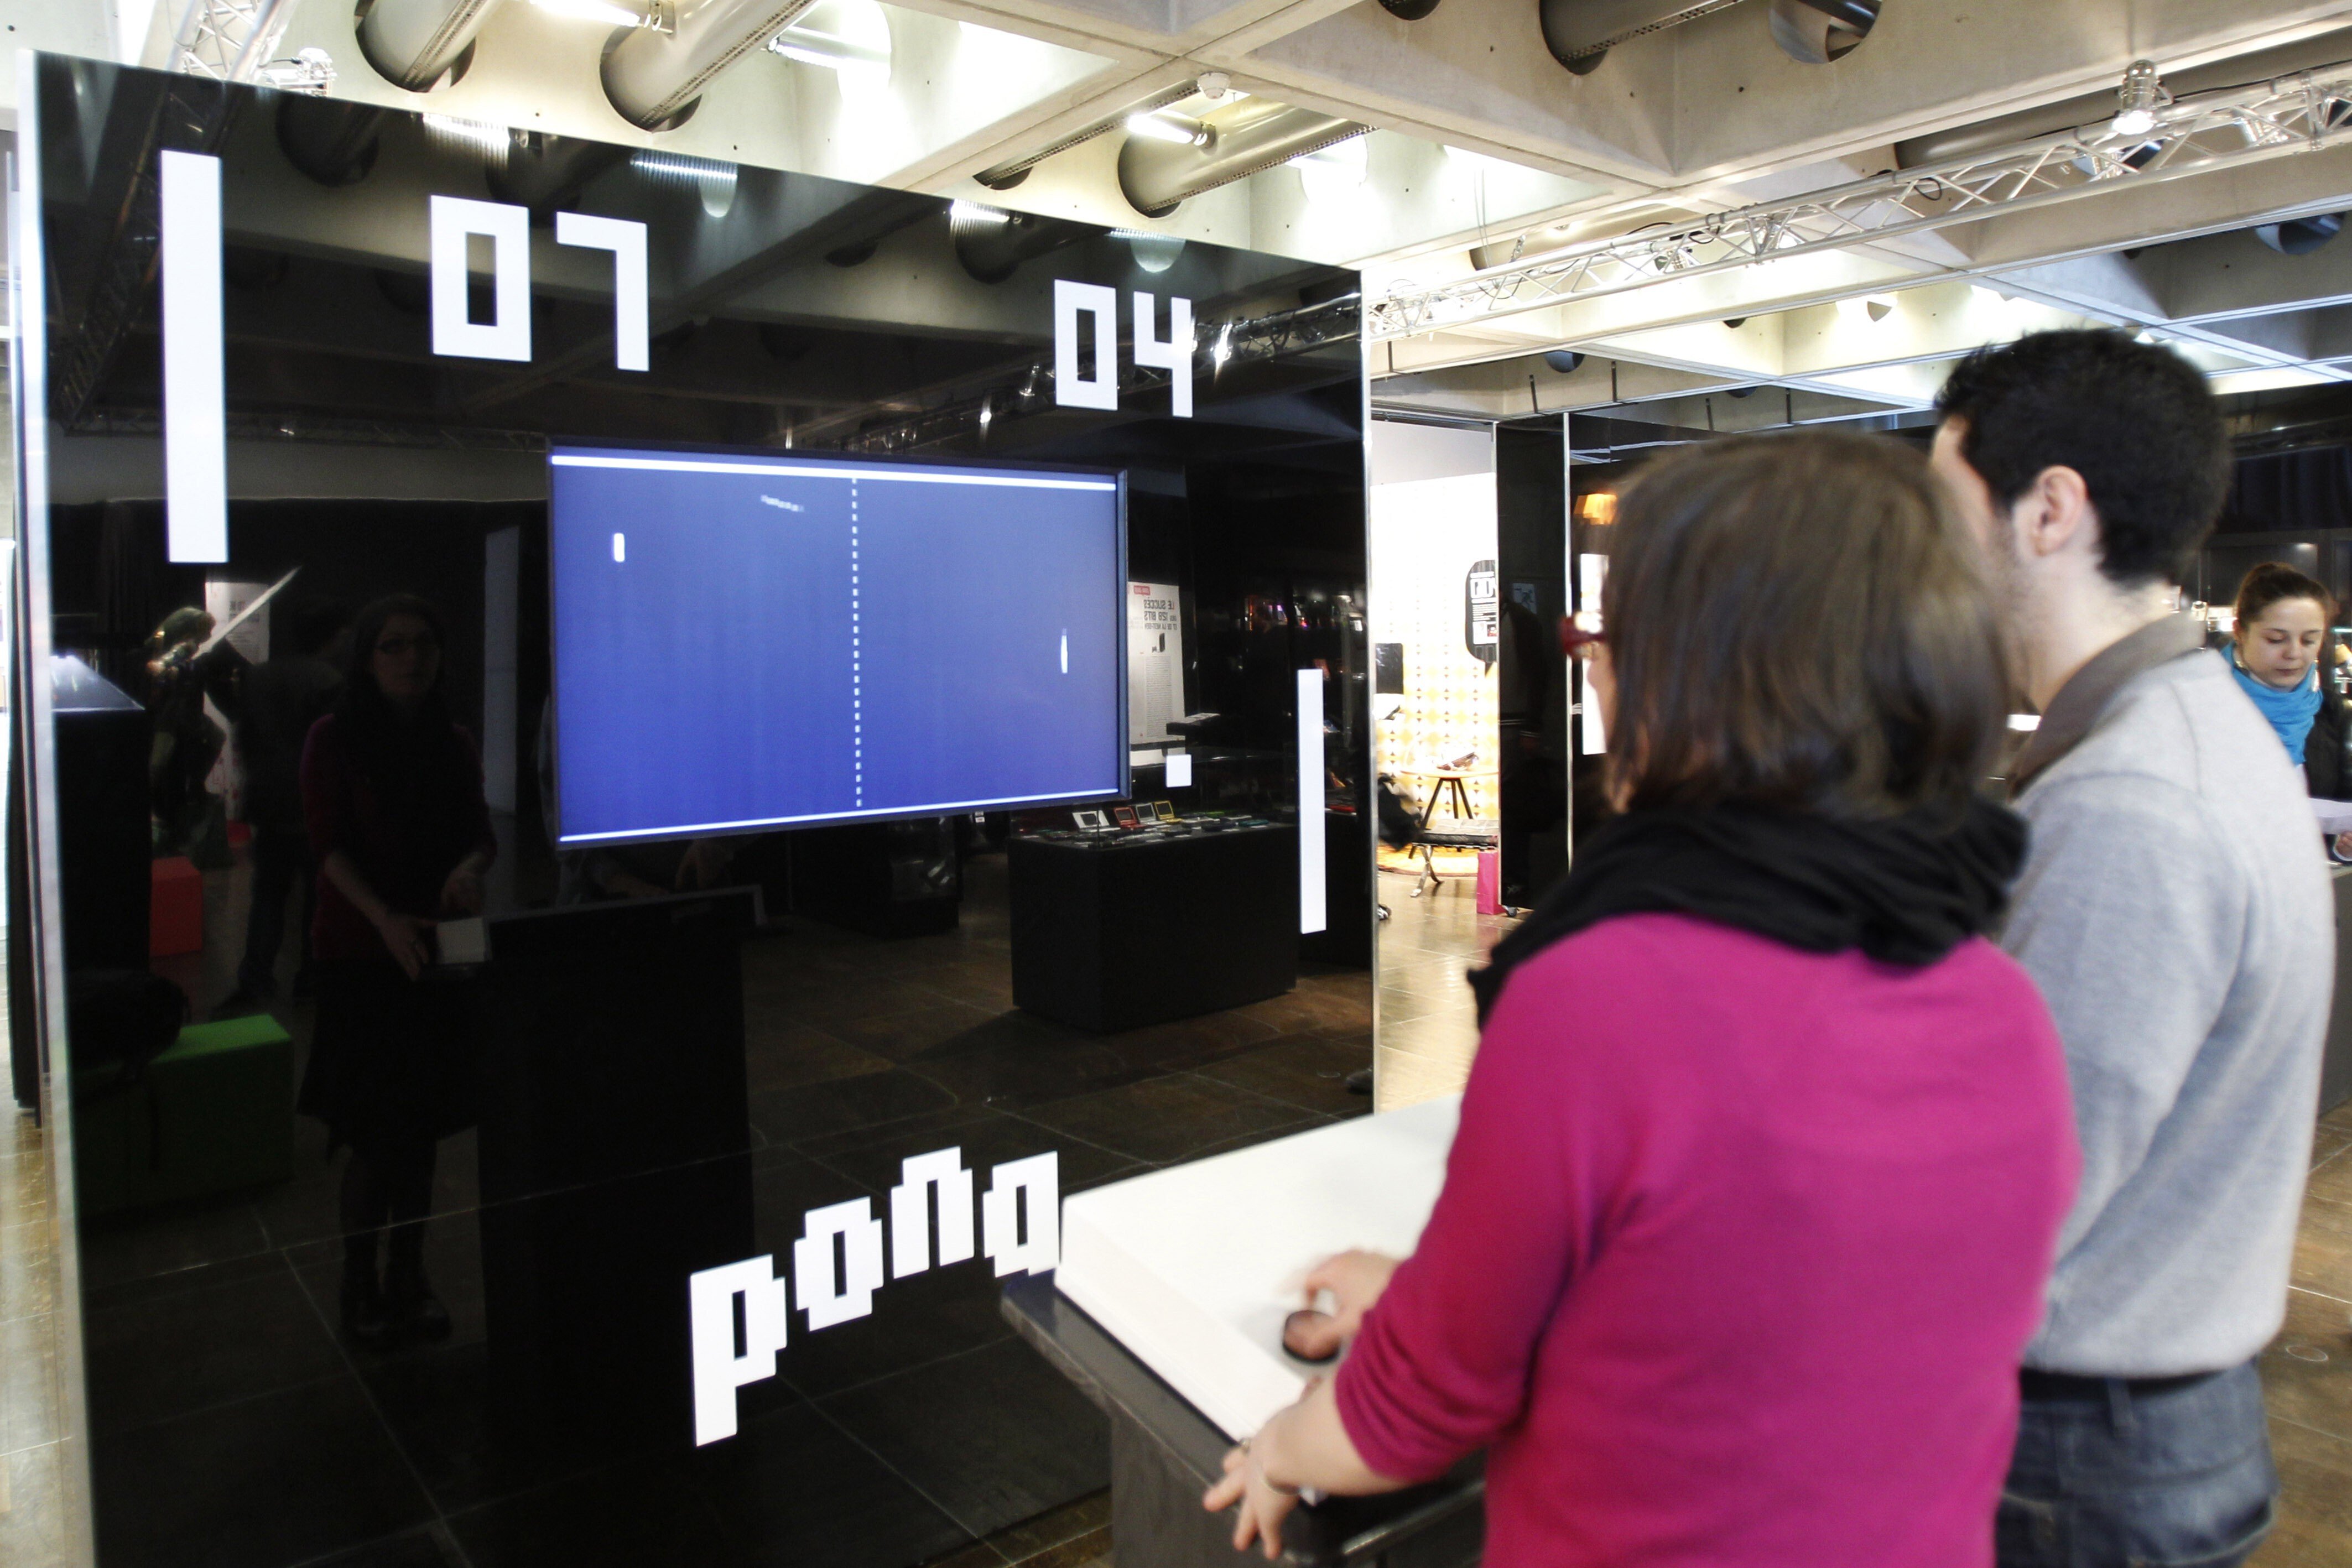 Video Game of the Year' traces gaming history from 'Pong' to the present